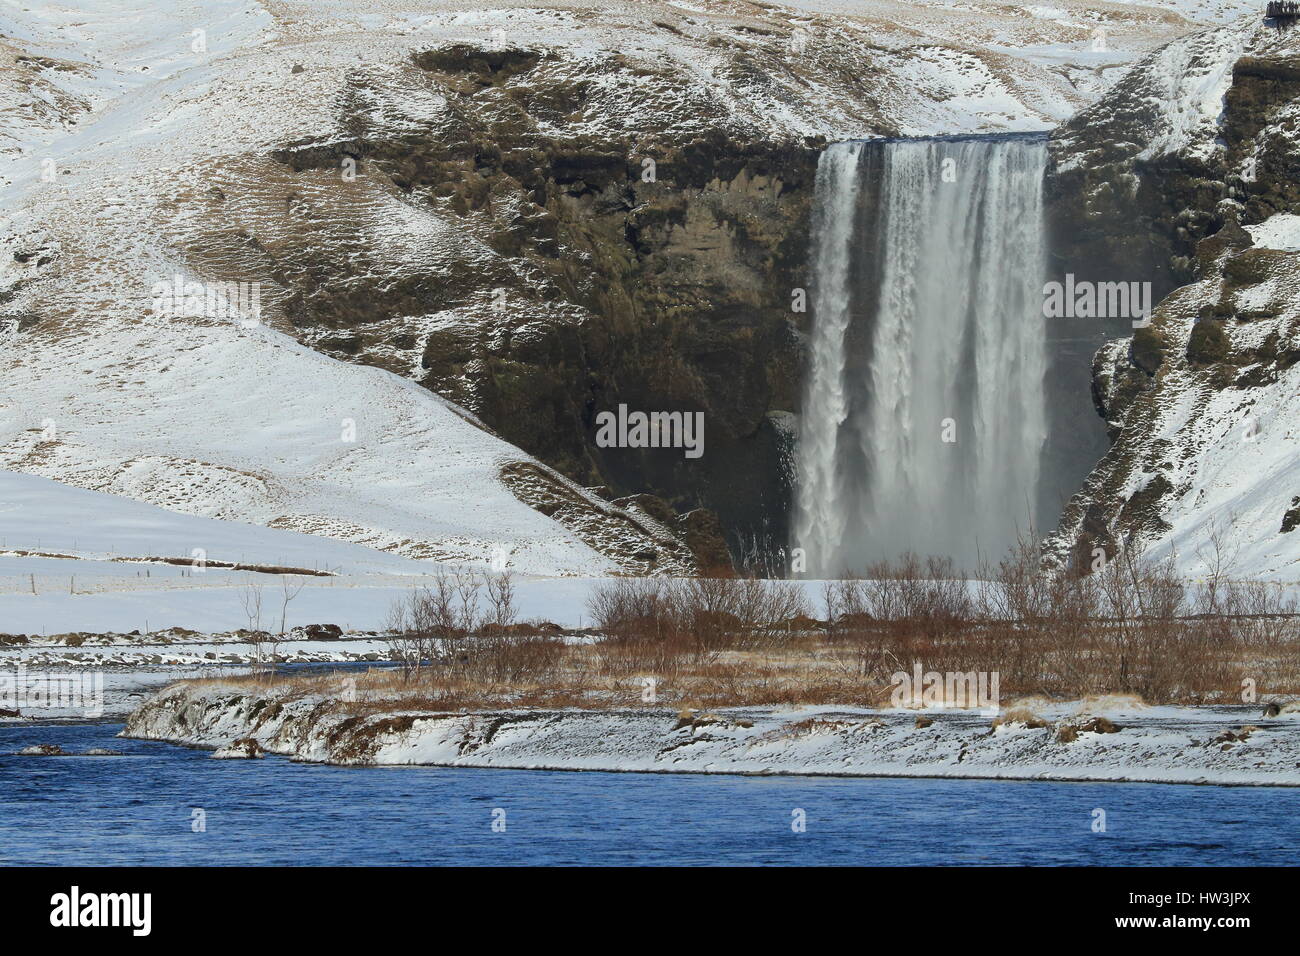 Iceland, Skogar, Skogafoss, Skogafoss waterfall surrounded by snow and ice in winter Stock Photo